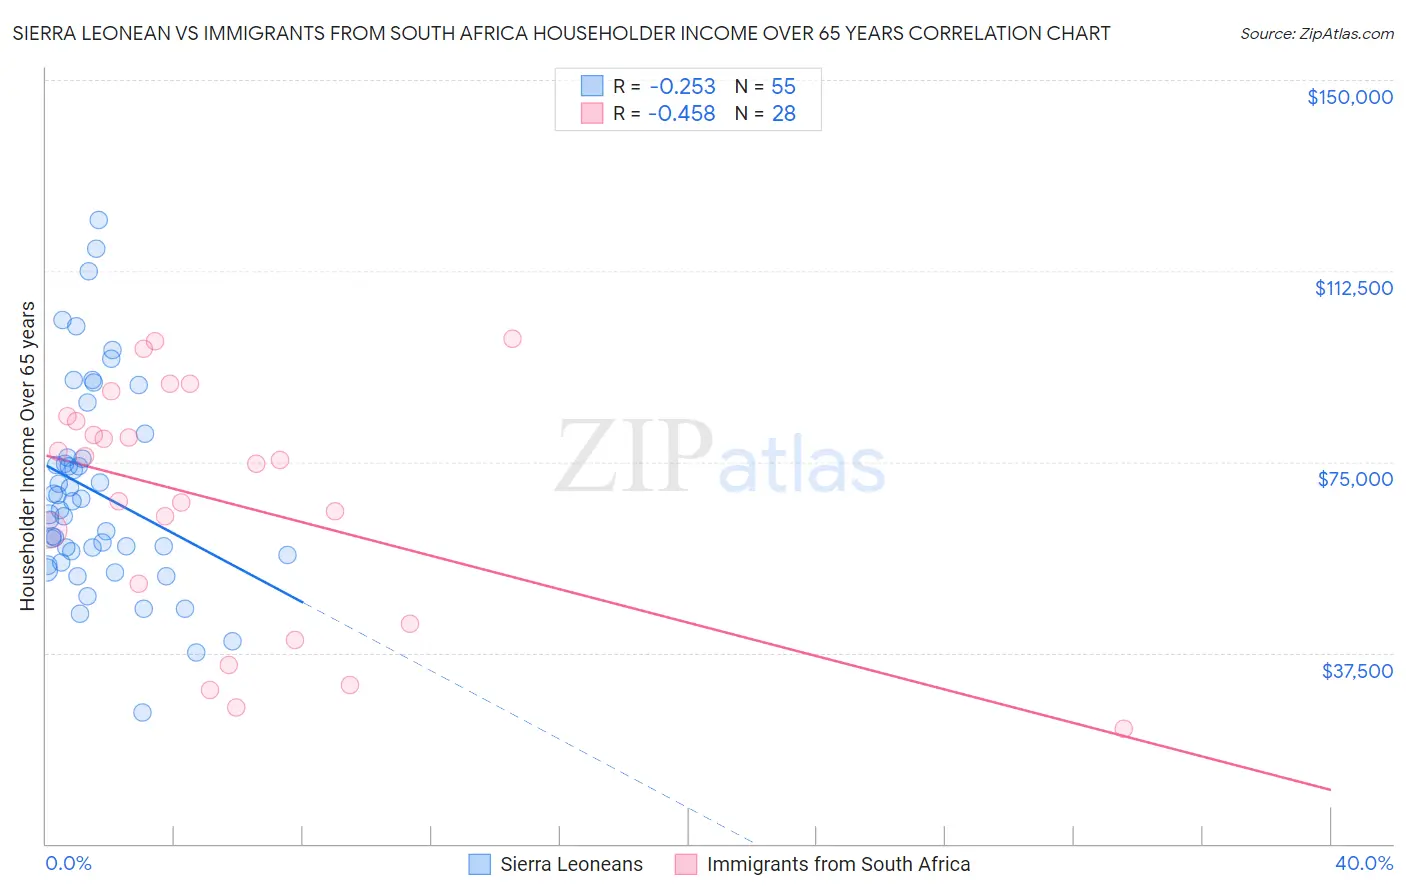 Sierra Leonean vs Immigrants from South Africa Householder Income Over 65 years